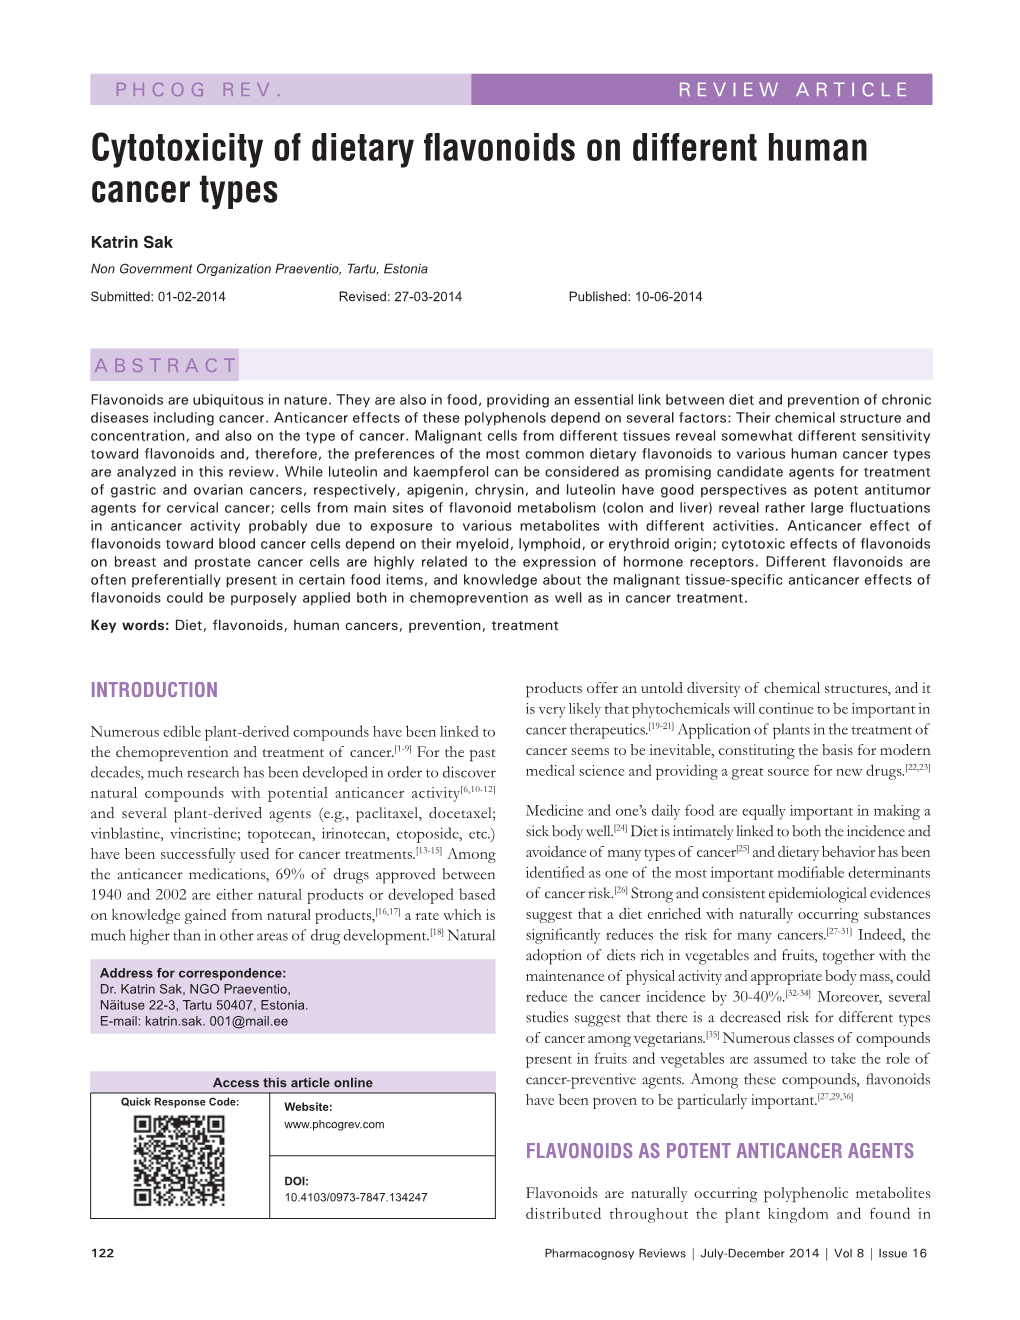 Cytotoxicity of Dietary Flavonoids on Different Human Cancer Types